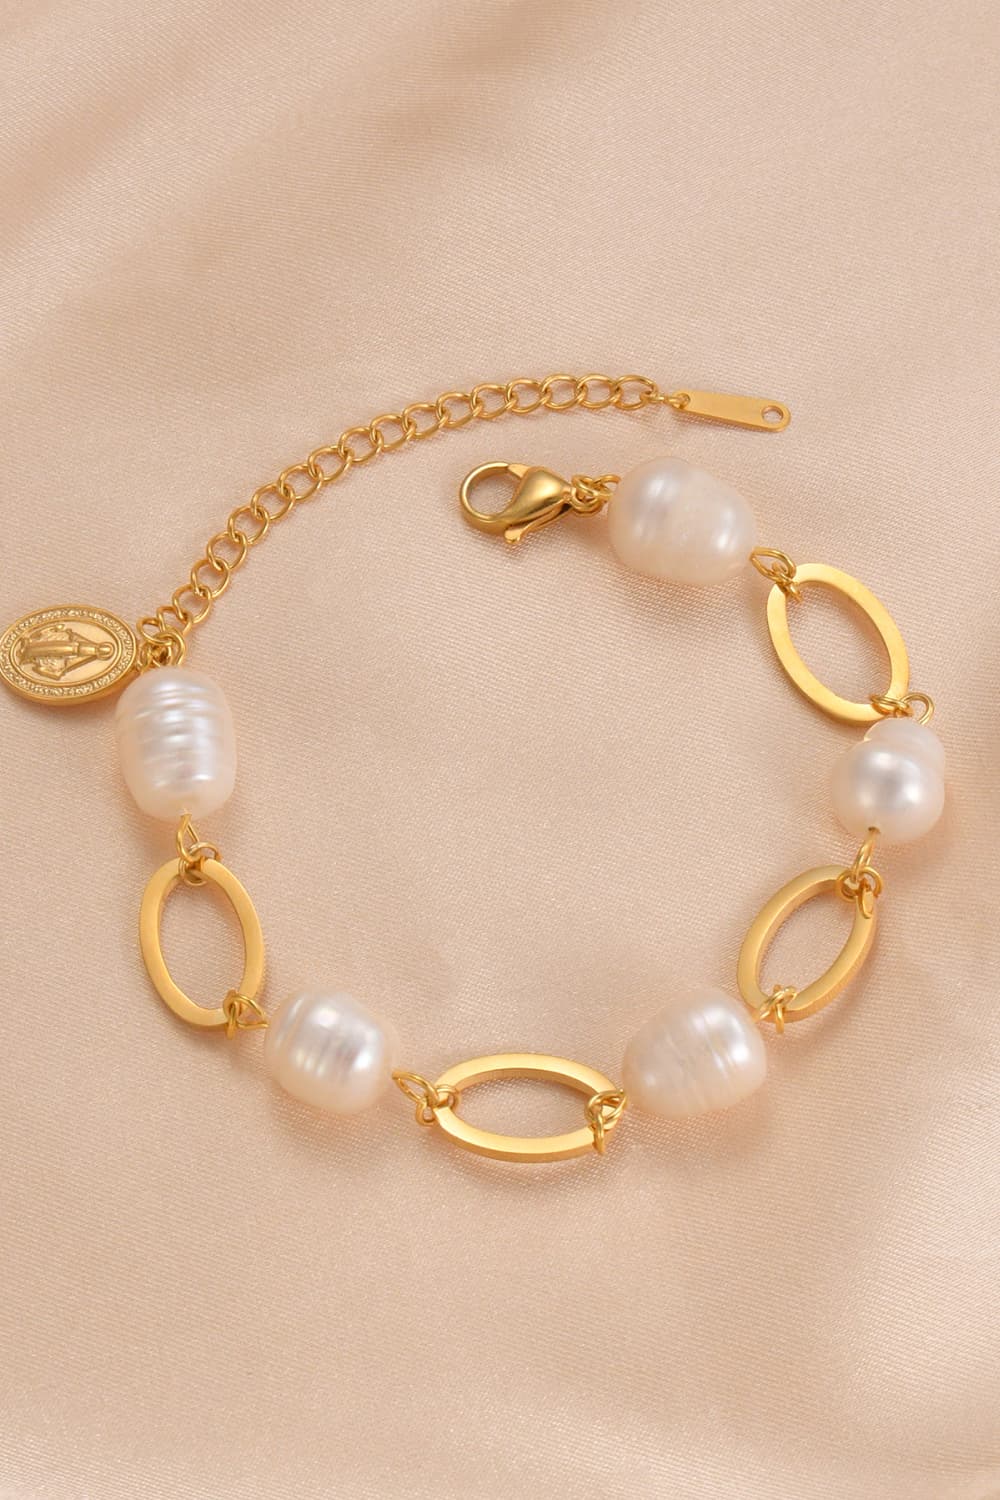 14K Gold-plated Lobster Closure Freshwater Pearl Bracelet - Uylee's Boutique